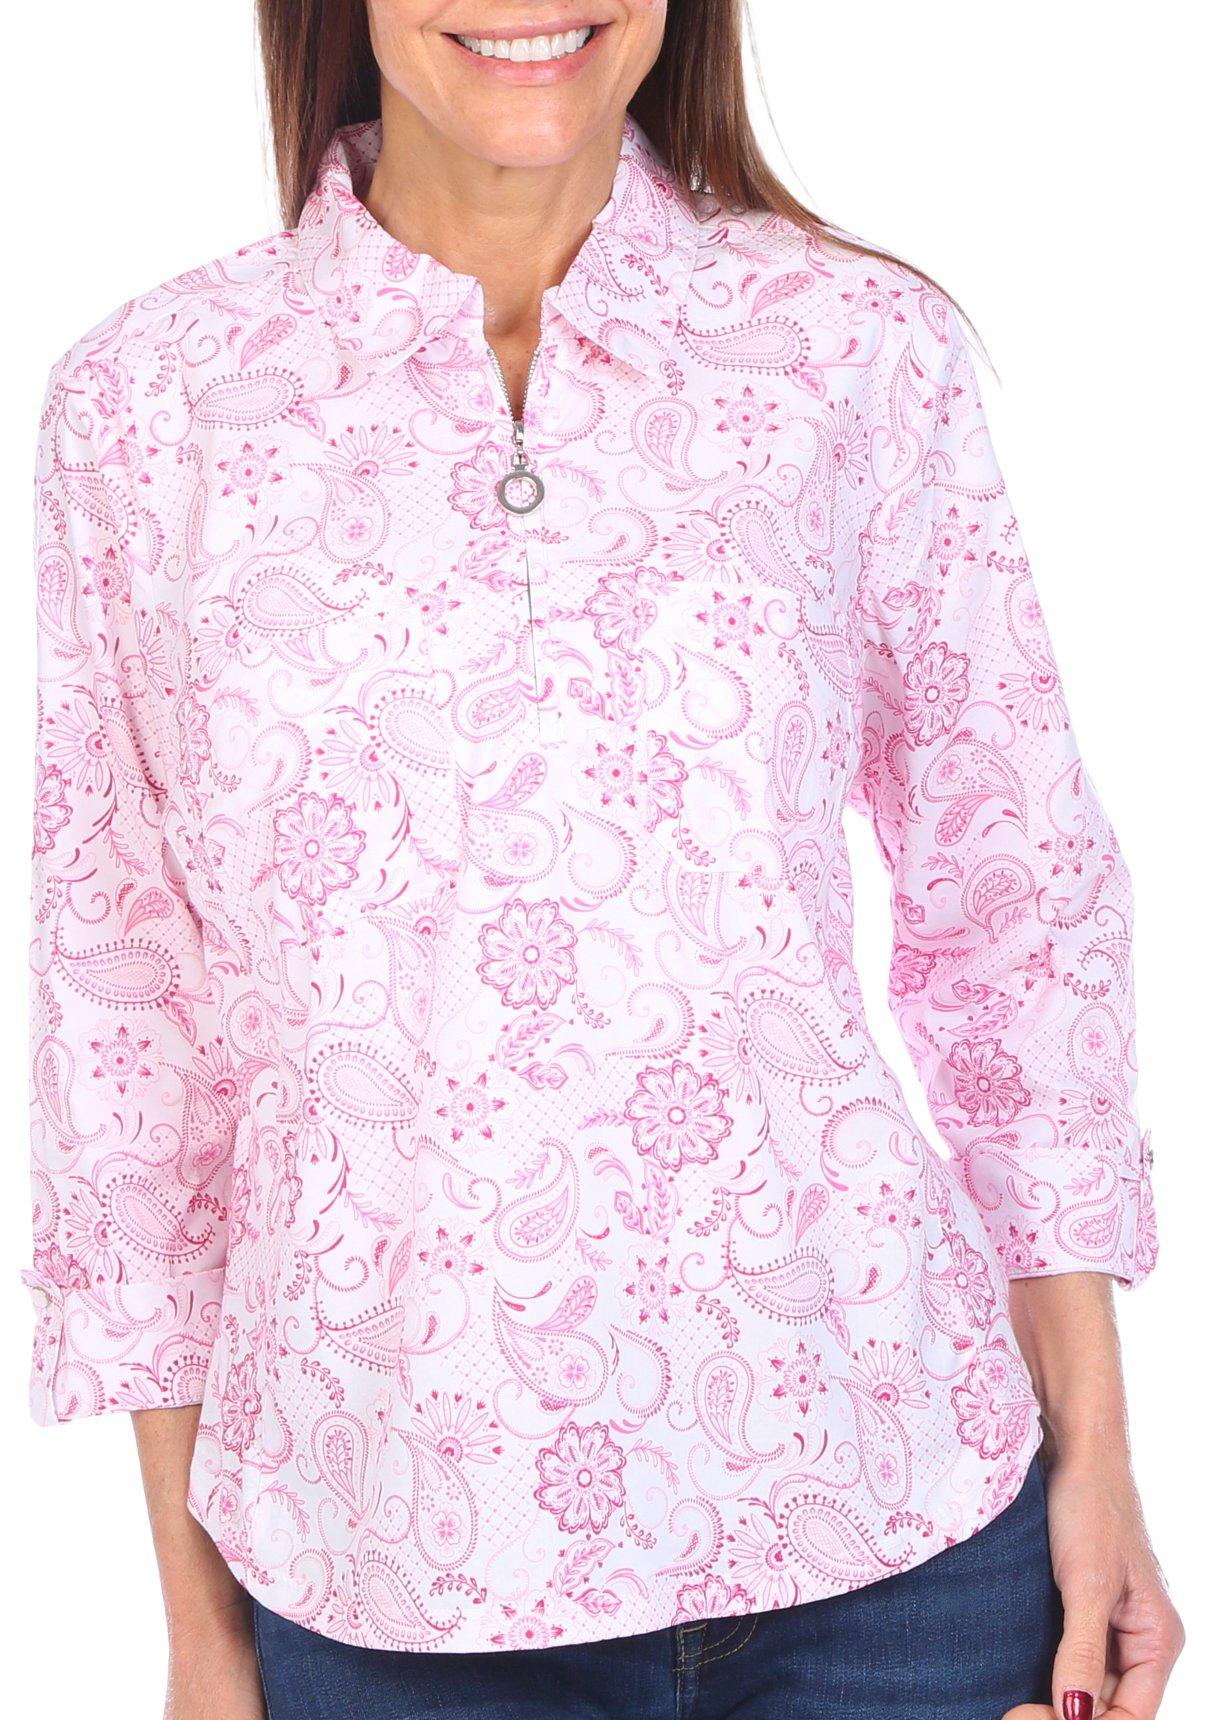 Coral Bay Petite Knit To Fit Paisley 3/4 Sleeve Top